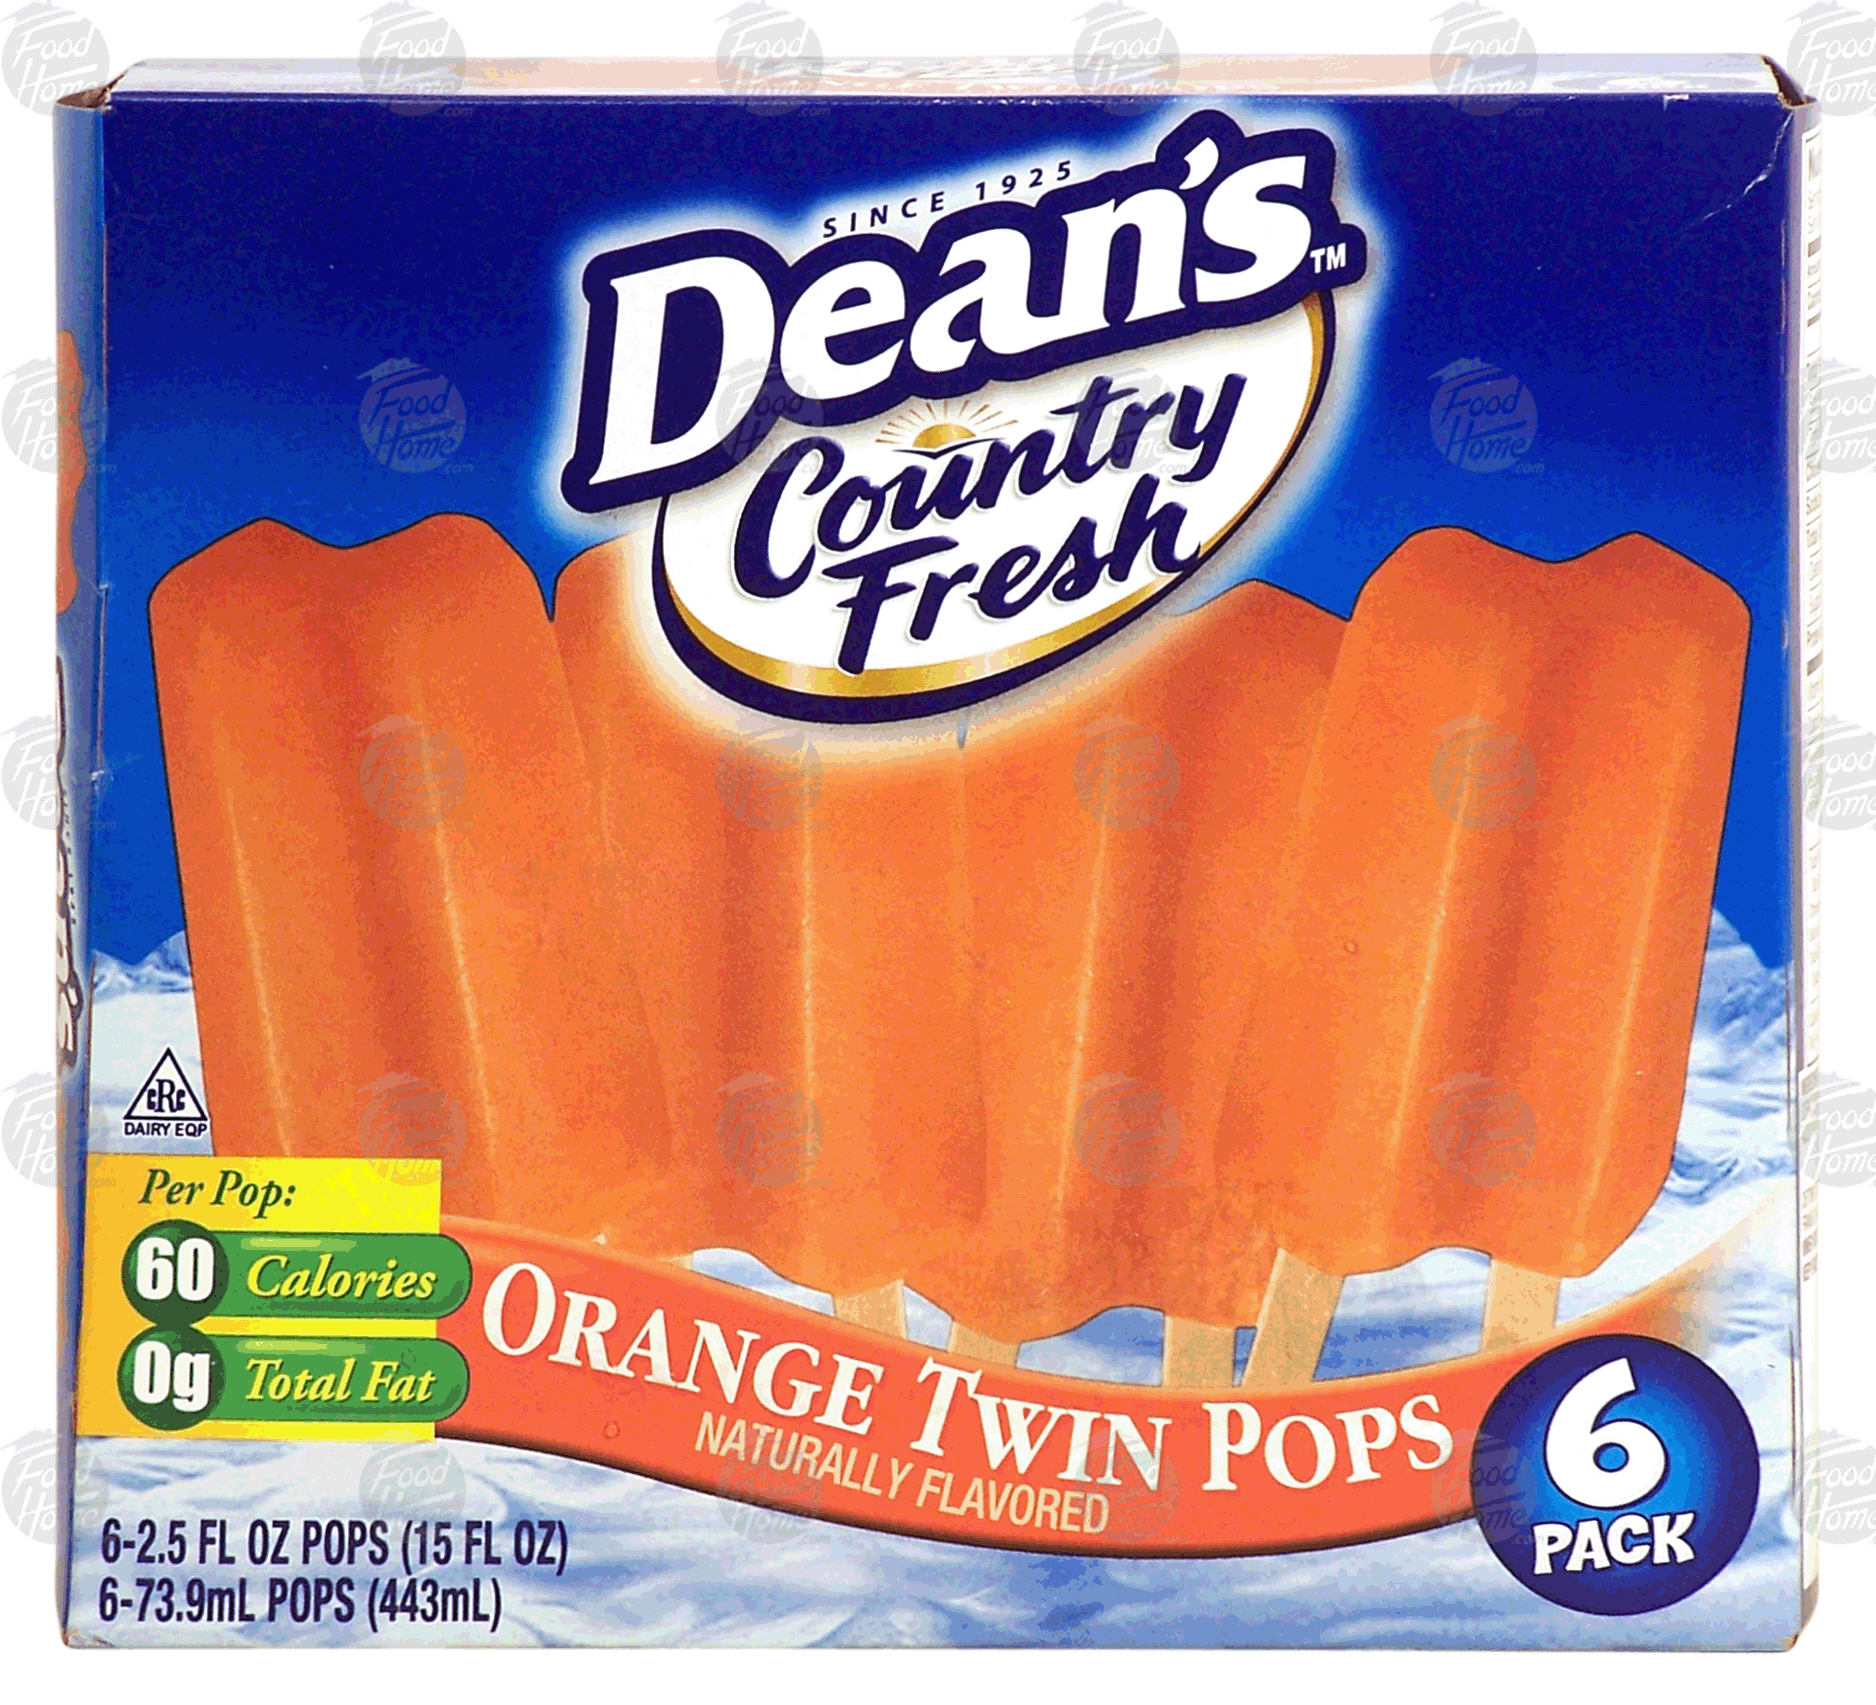 Dean's Country Fresh orange twin pops, 6 pack Full-Size Picture